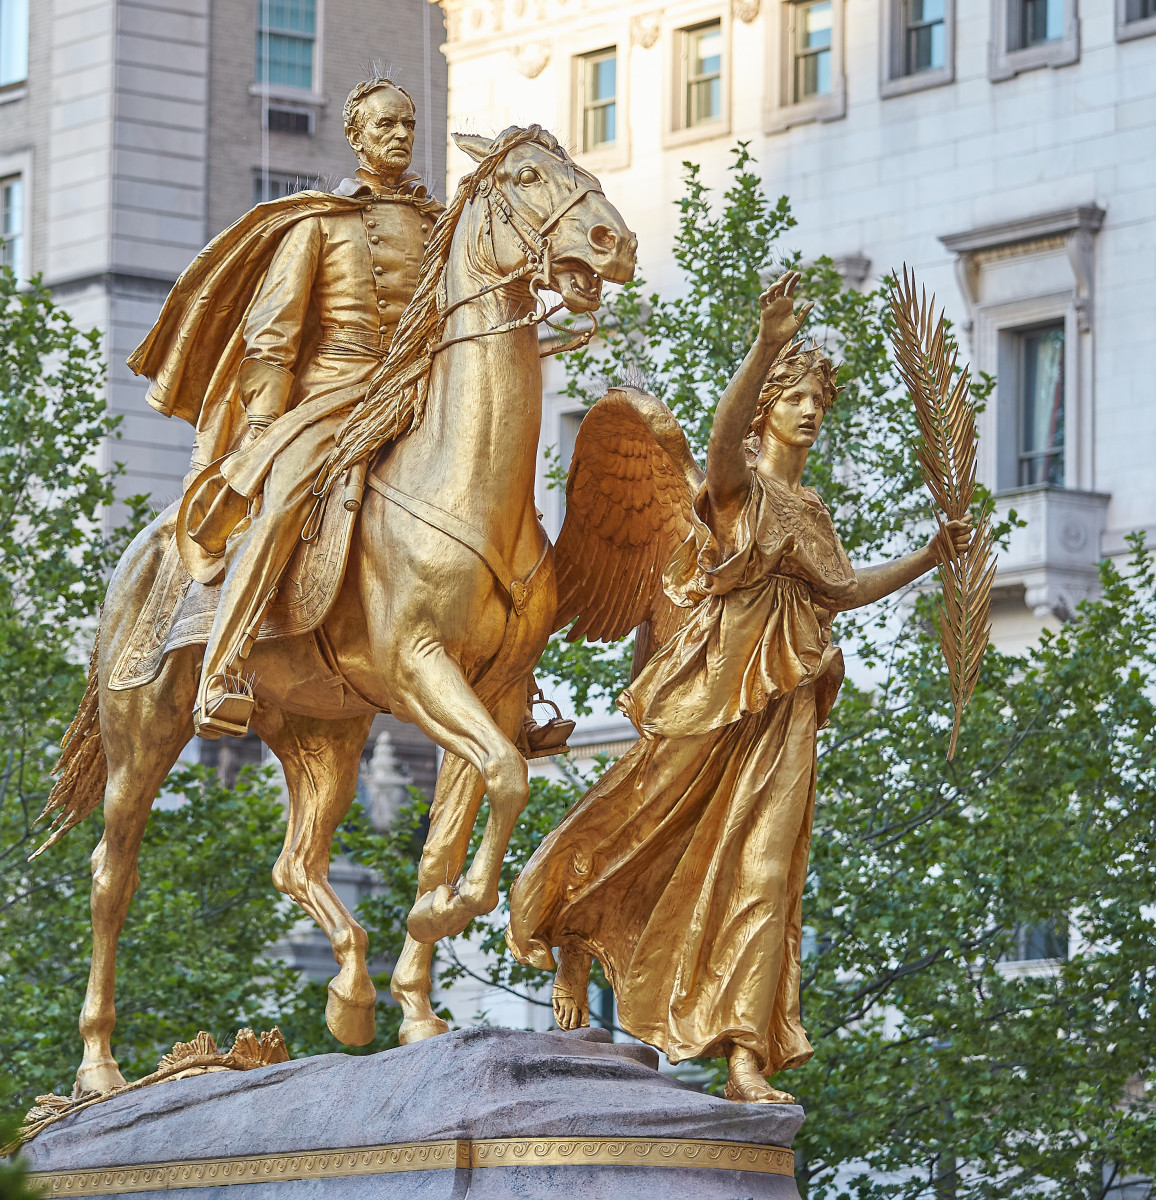 'The Sherman Monument,' at the entrance to New York’s Central Park, was unveiled in 1903 in a ceremony attended by Augustus Saint-Gaudens and his wife, Augusta. (Image courtesy Wikimedia Commons, photographed by Axel Tschentscher.)